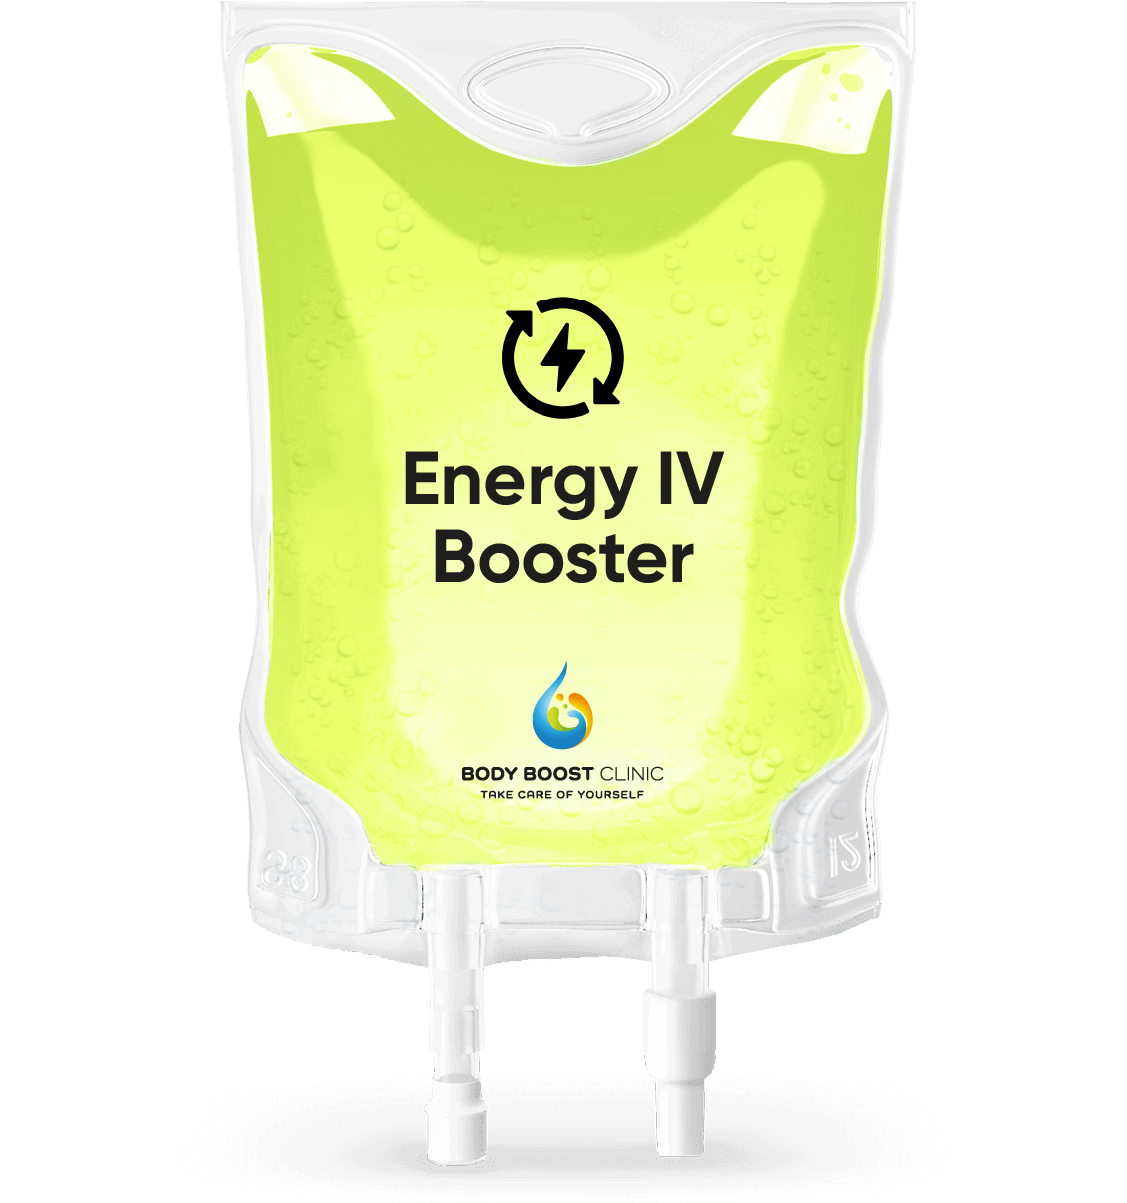 Body Boost Clinic Hull - Vitamin IV drip energy booster to feel better (better than energy drink)